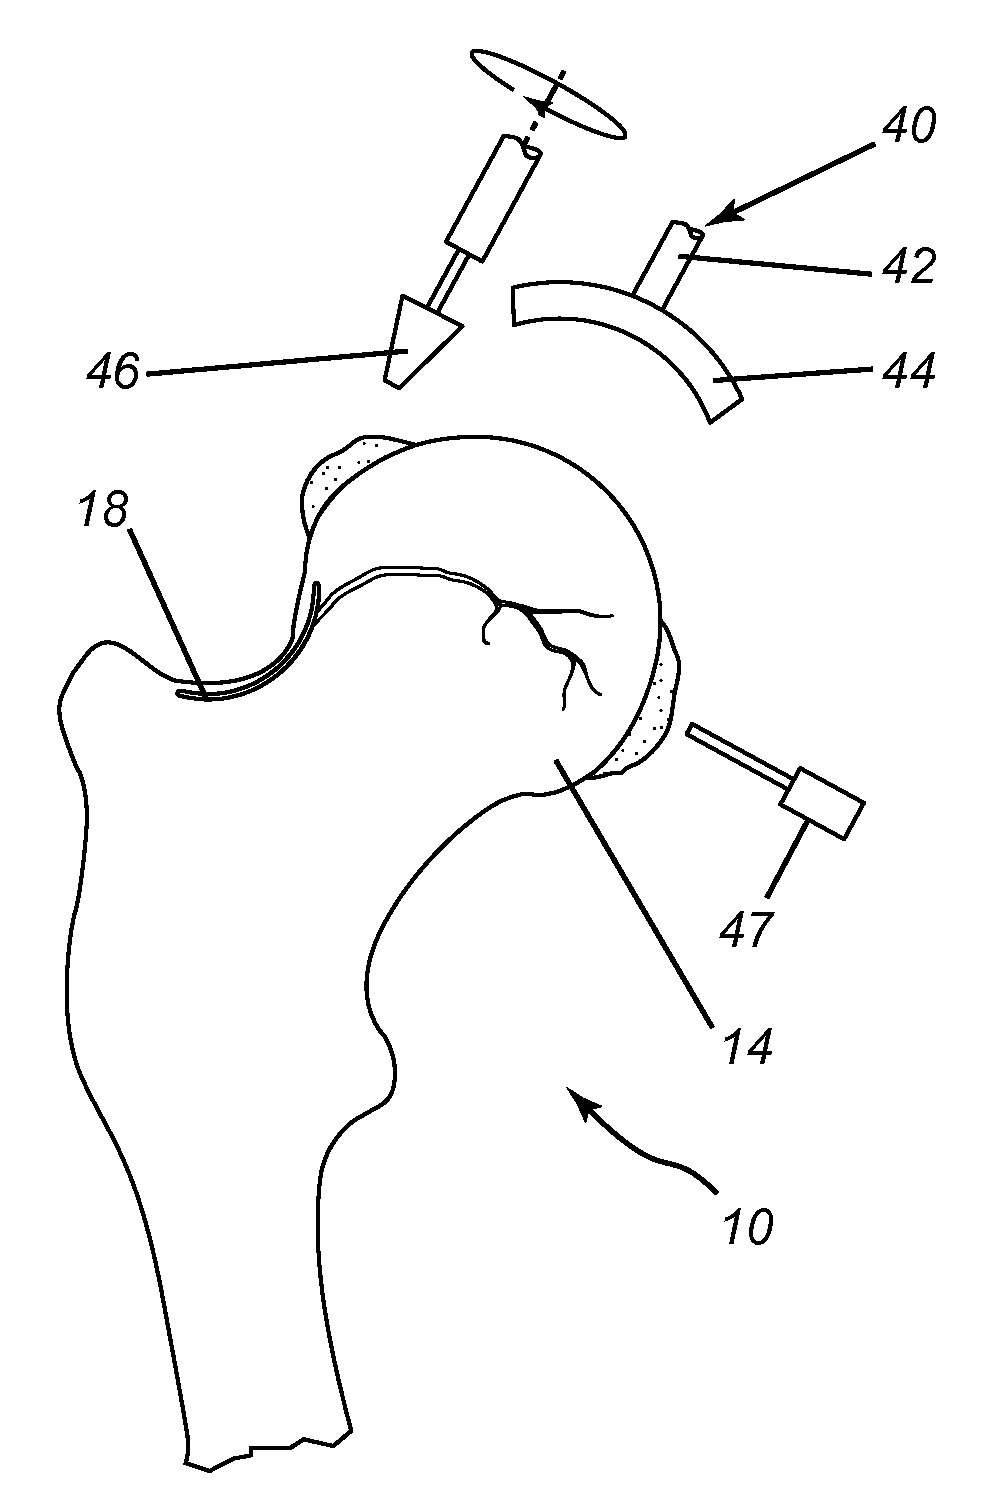 Surgical instrument tray, hip resurfacing kit, and method of resurfacing a femoral head to preserve femoral head vascularity